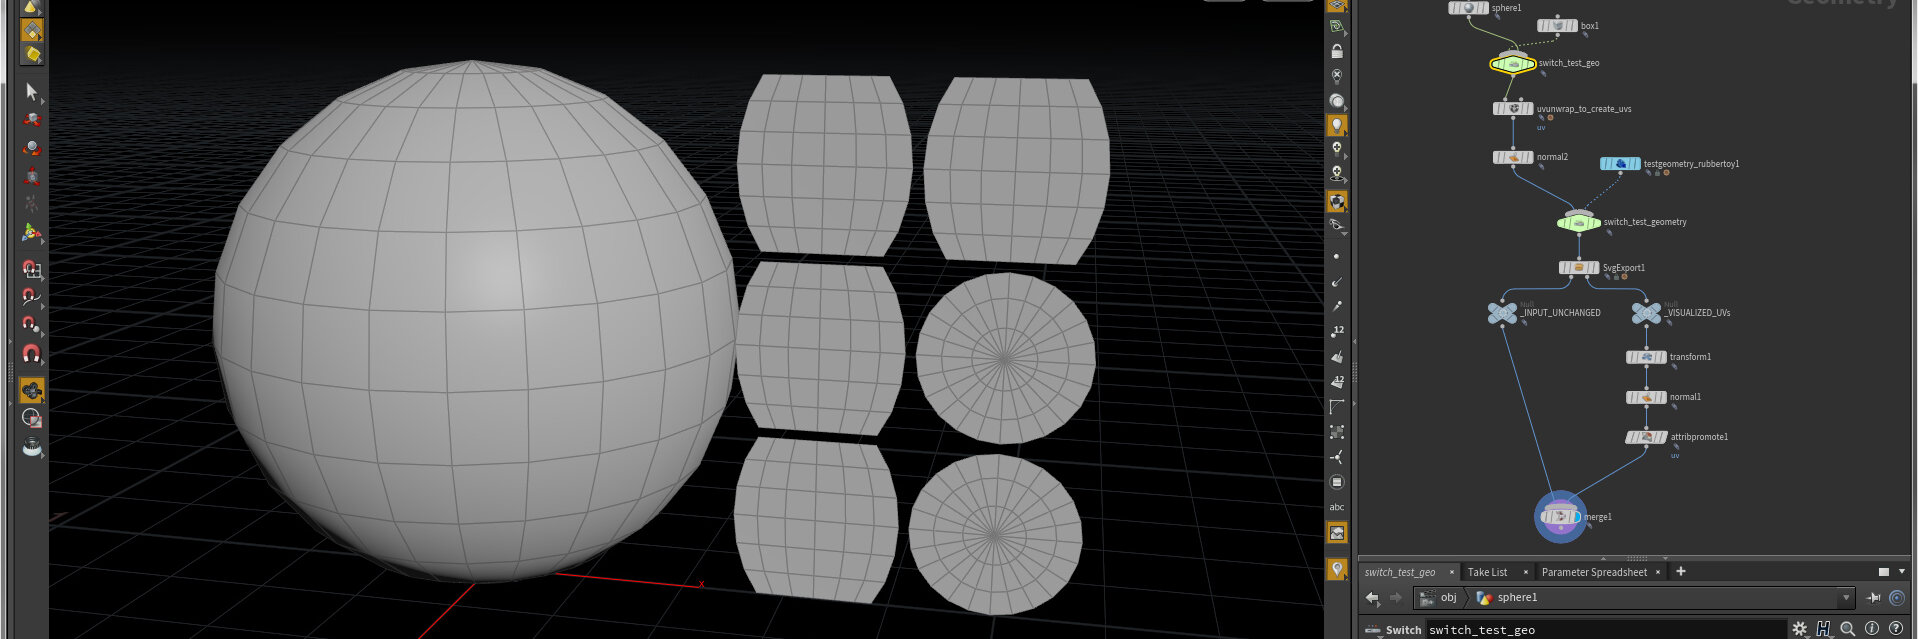 Houdini Screenshot with sphere and unwrapped Uvs